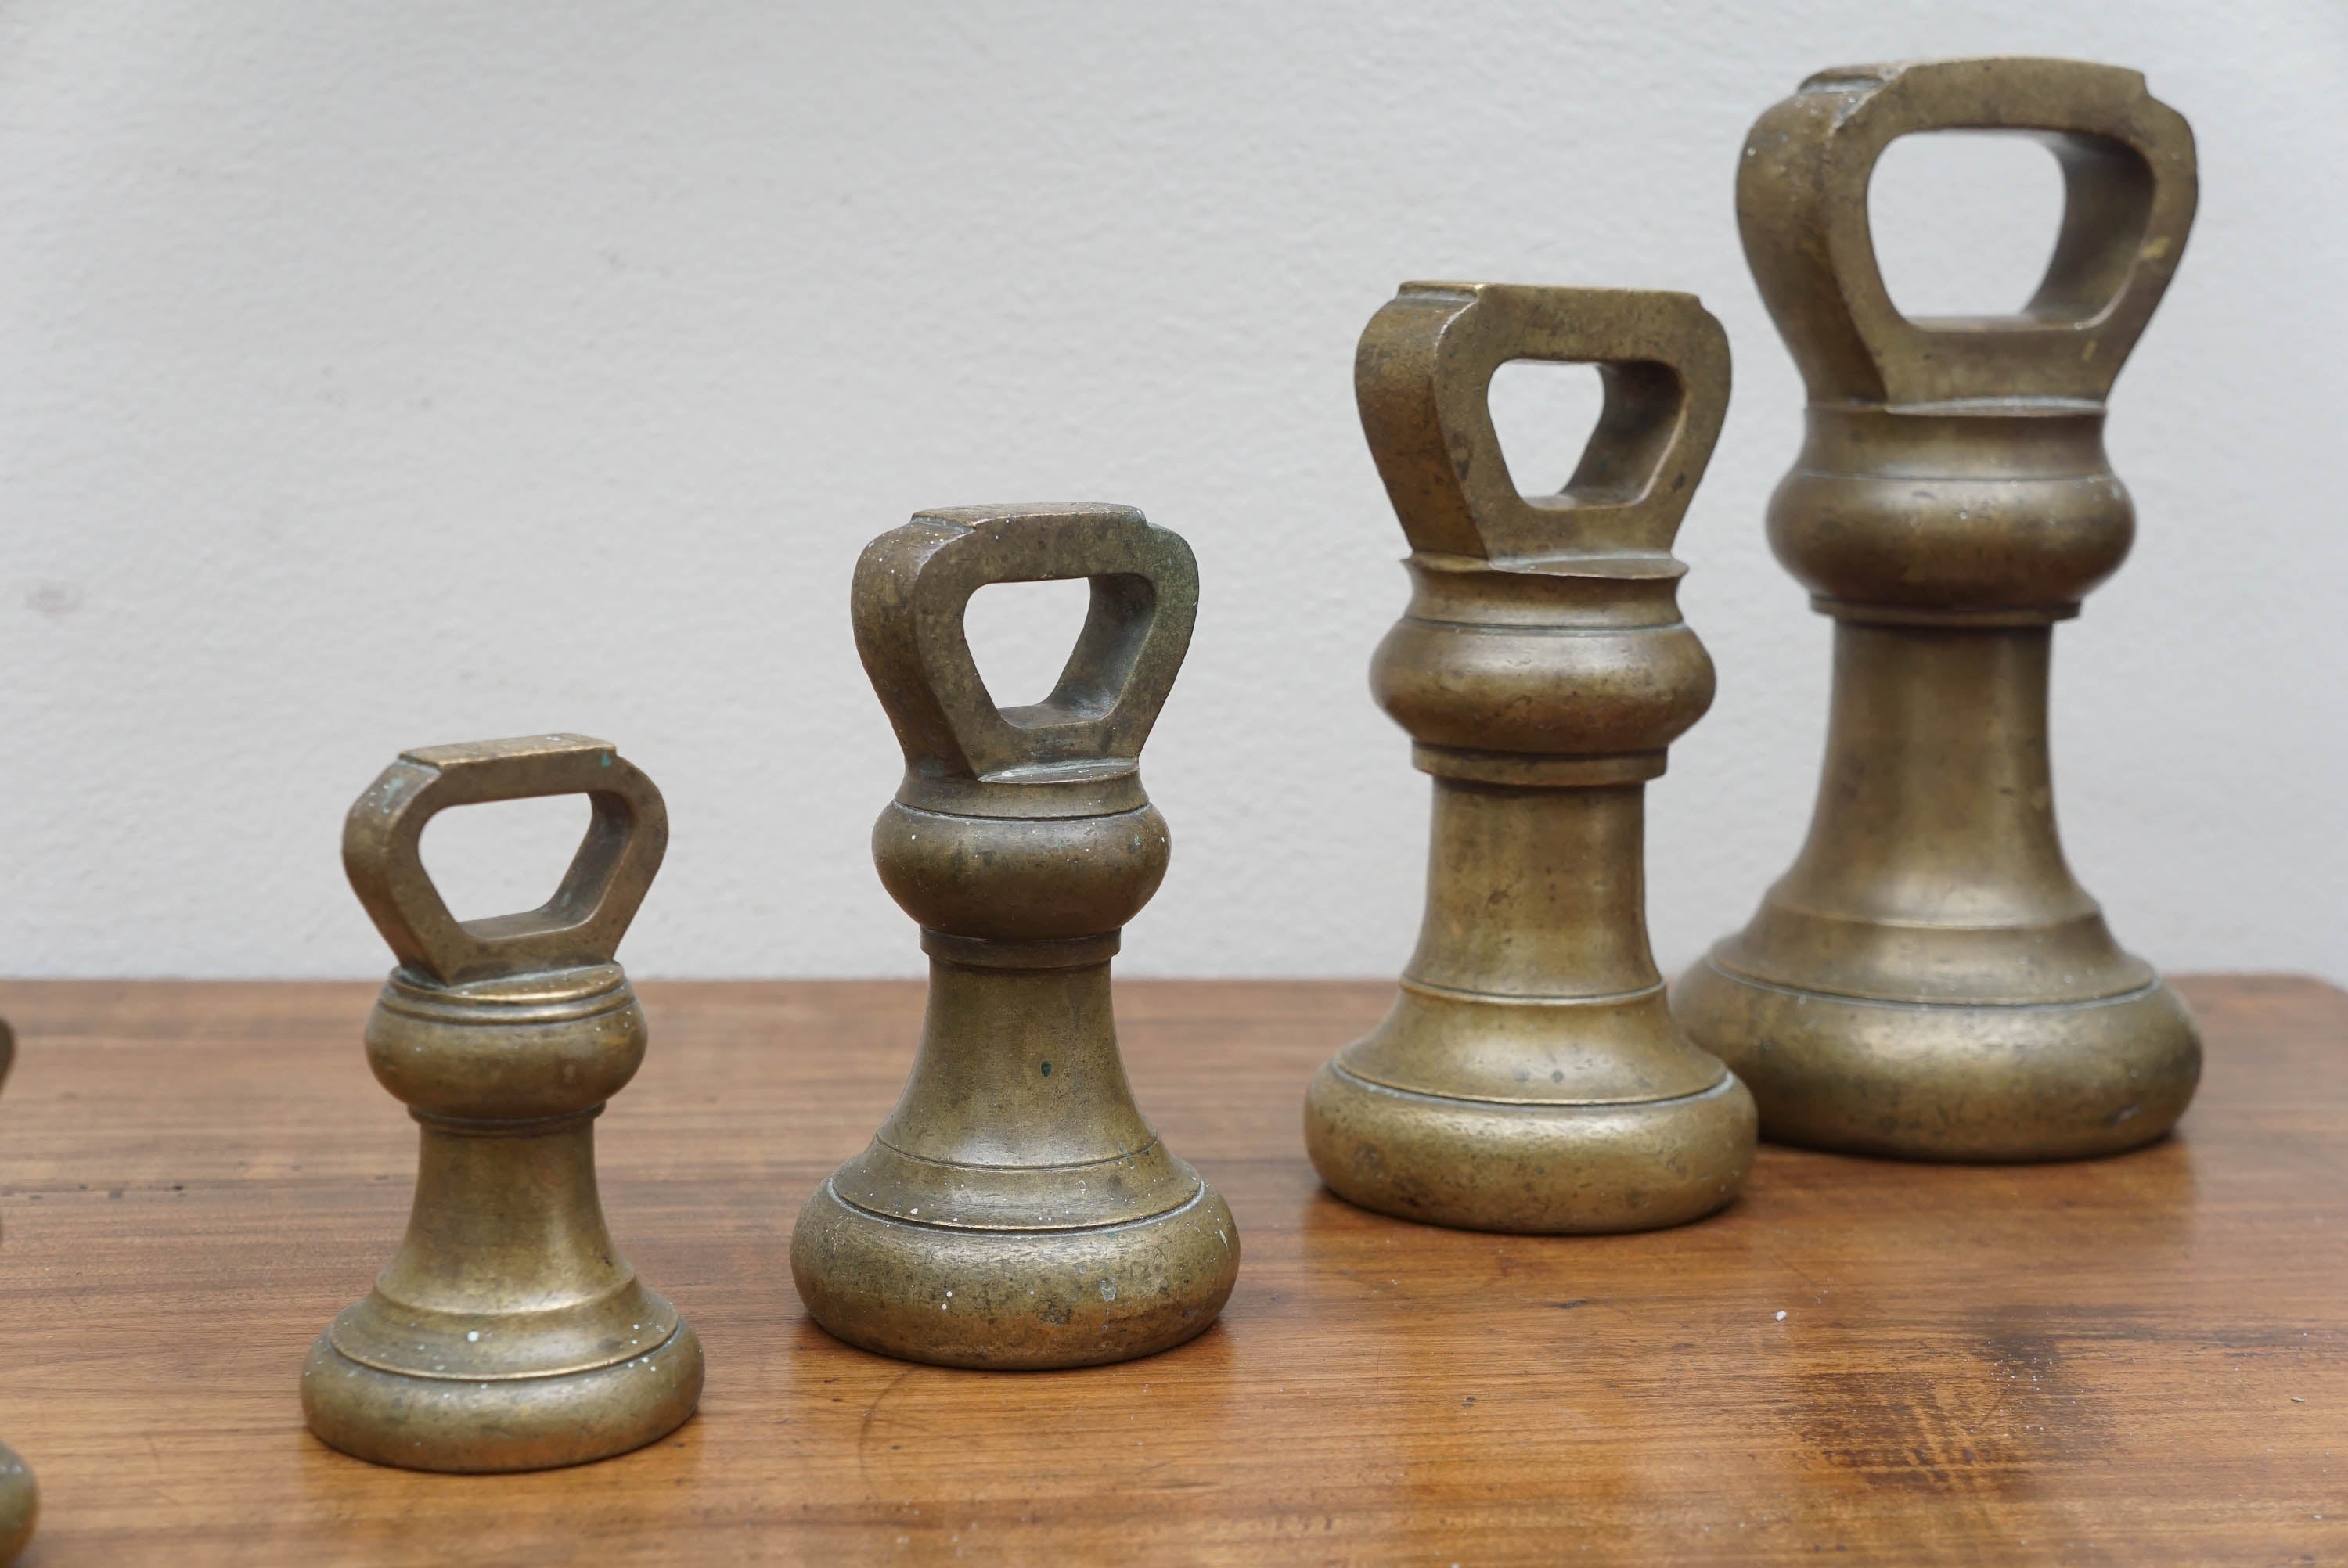 Great Britain (UK) Complete Set of Brass Weights